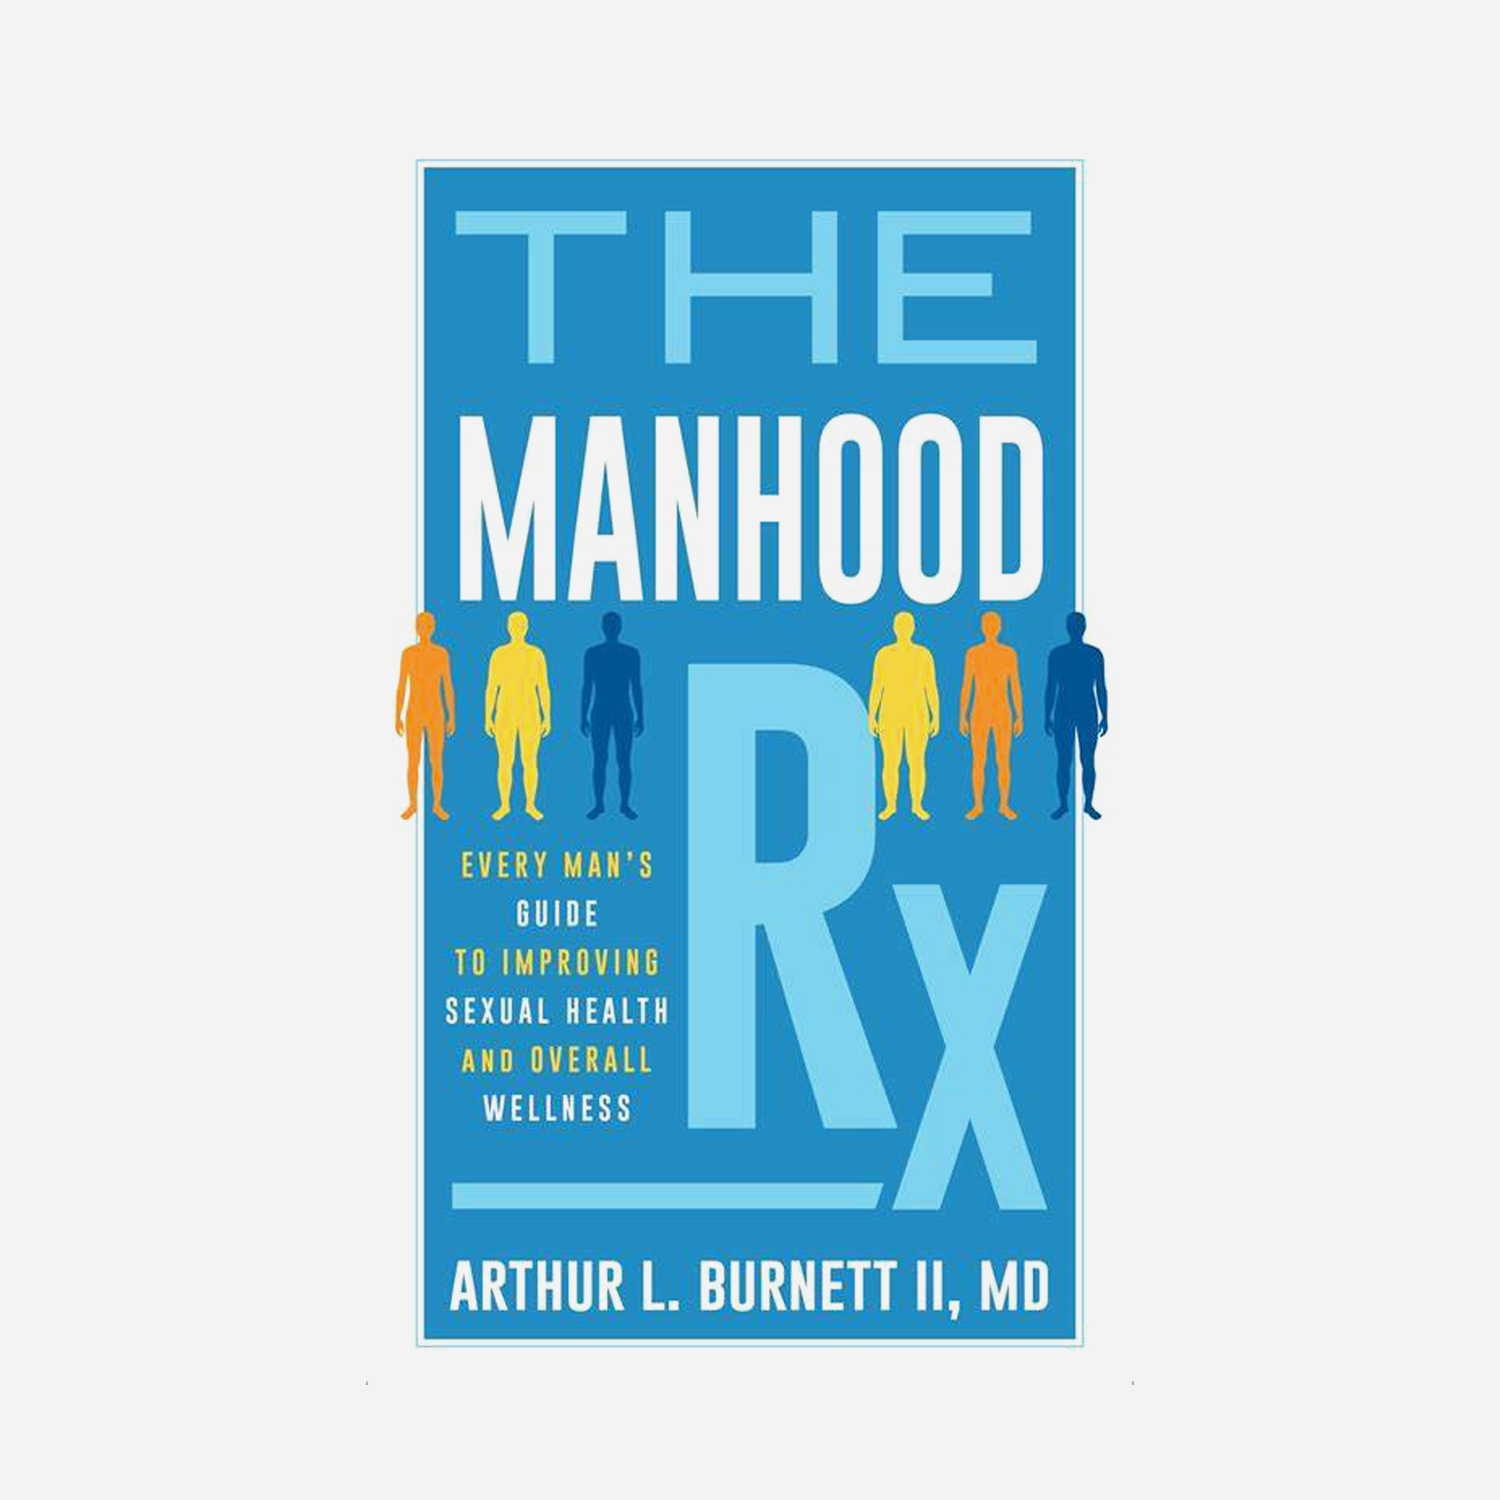 Manhood Rx Guide To Male Sexual Health And Wellness